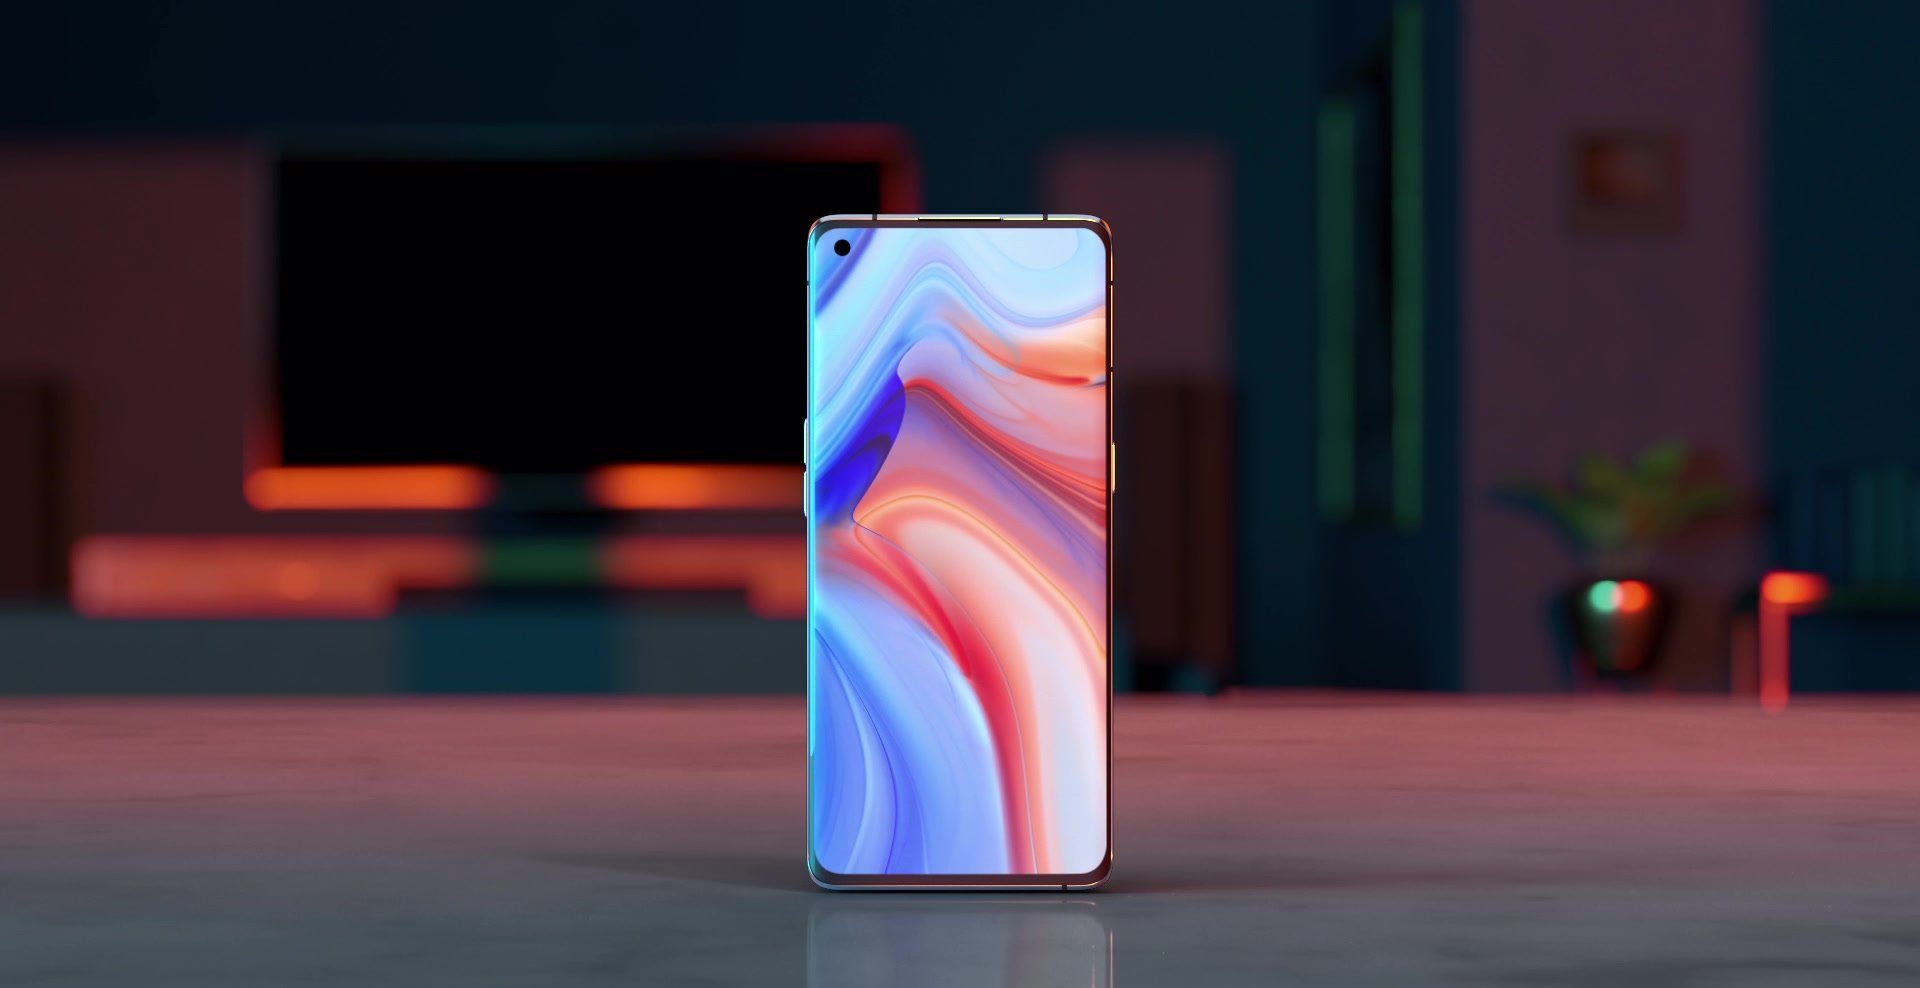 Overview of the new Oppo Reno 4 and Reno 4 Pro with pros and cons